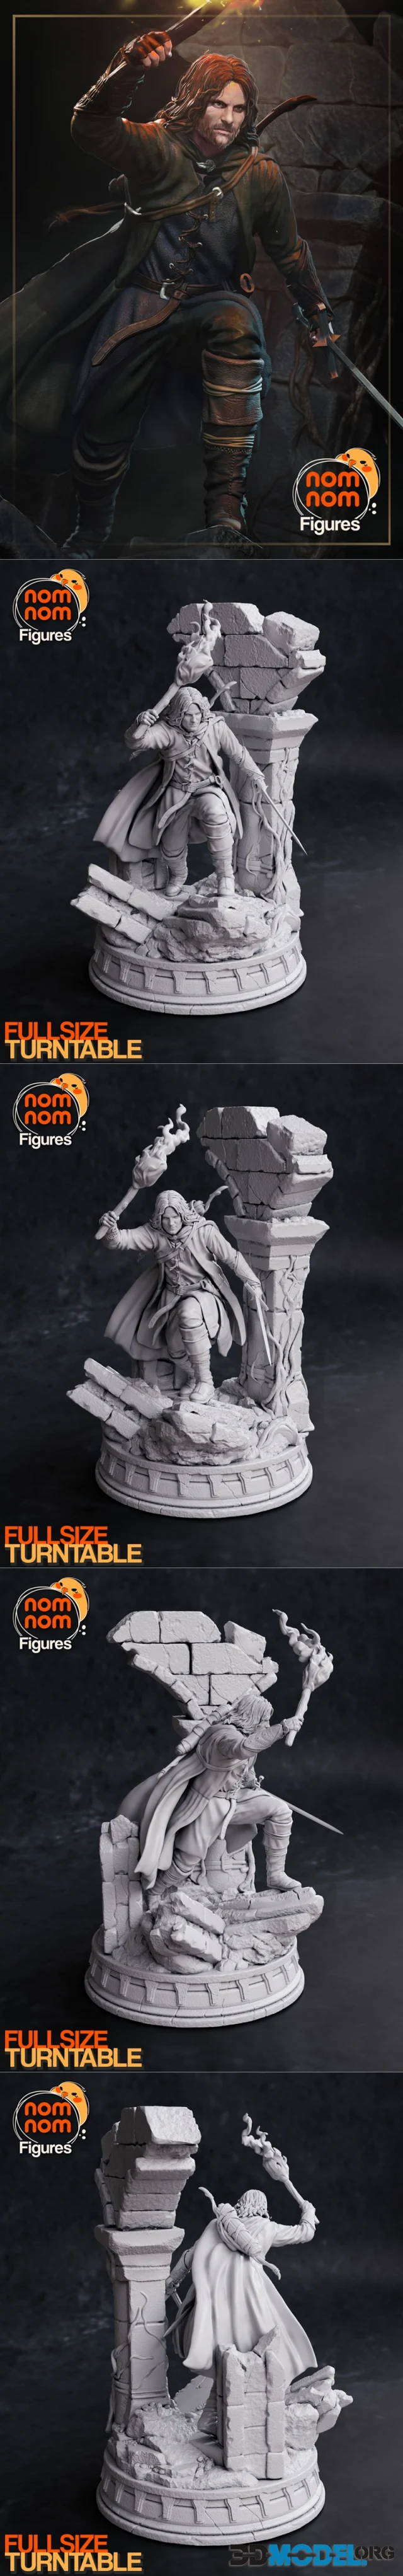 Aragorn - Lord of the Rings - NomNom Figures – Printable